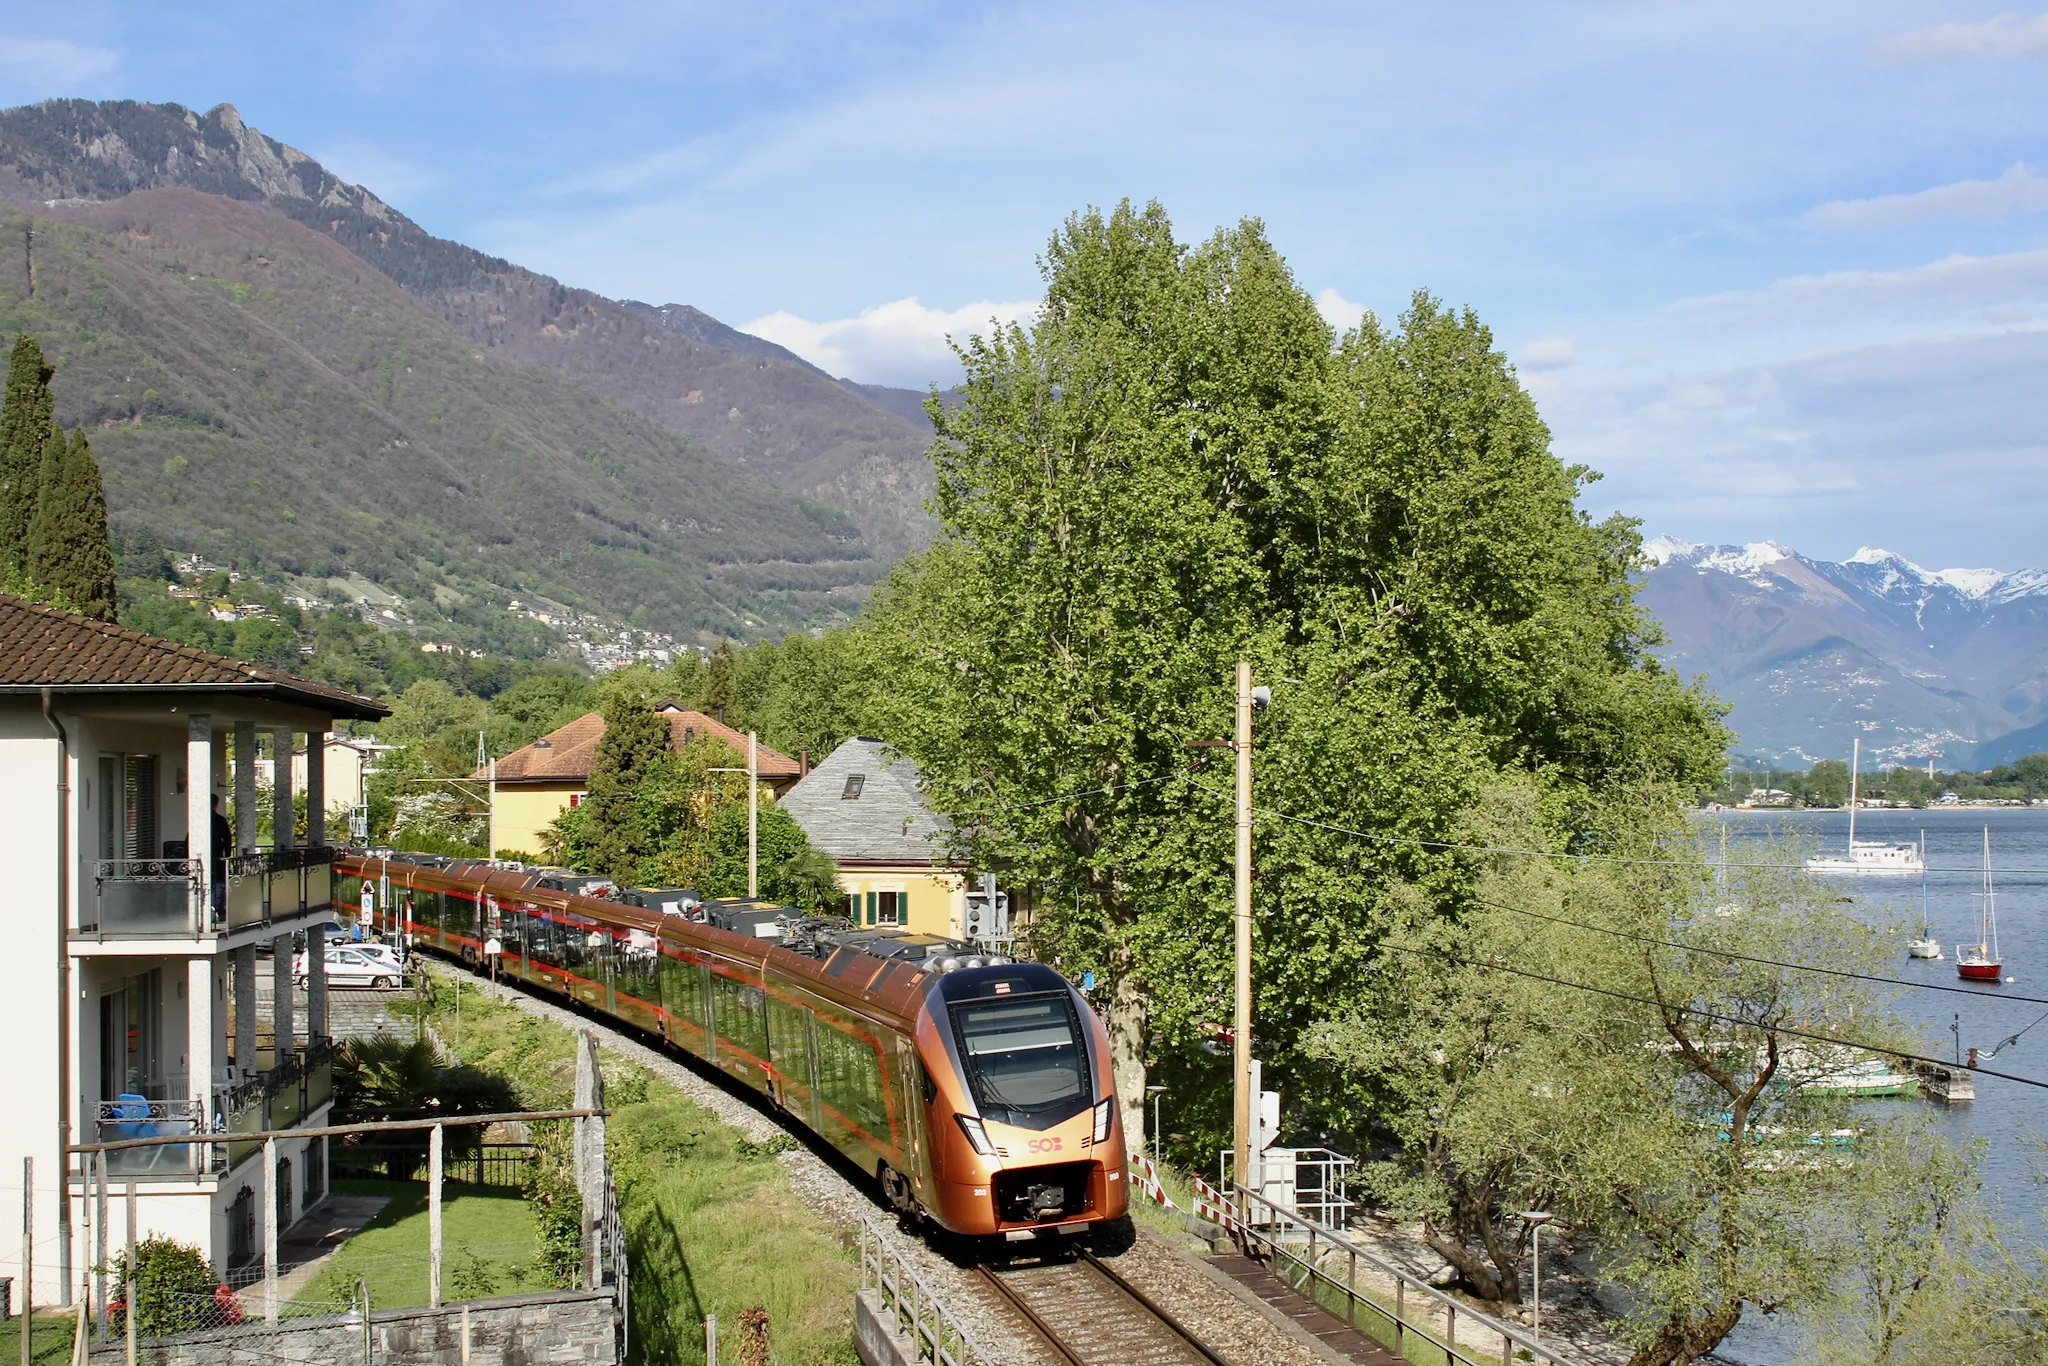 Photo showing: SOB RABe 526 203 passing through Minusio as IR46 2425 from Zürich HB to Locarno.